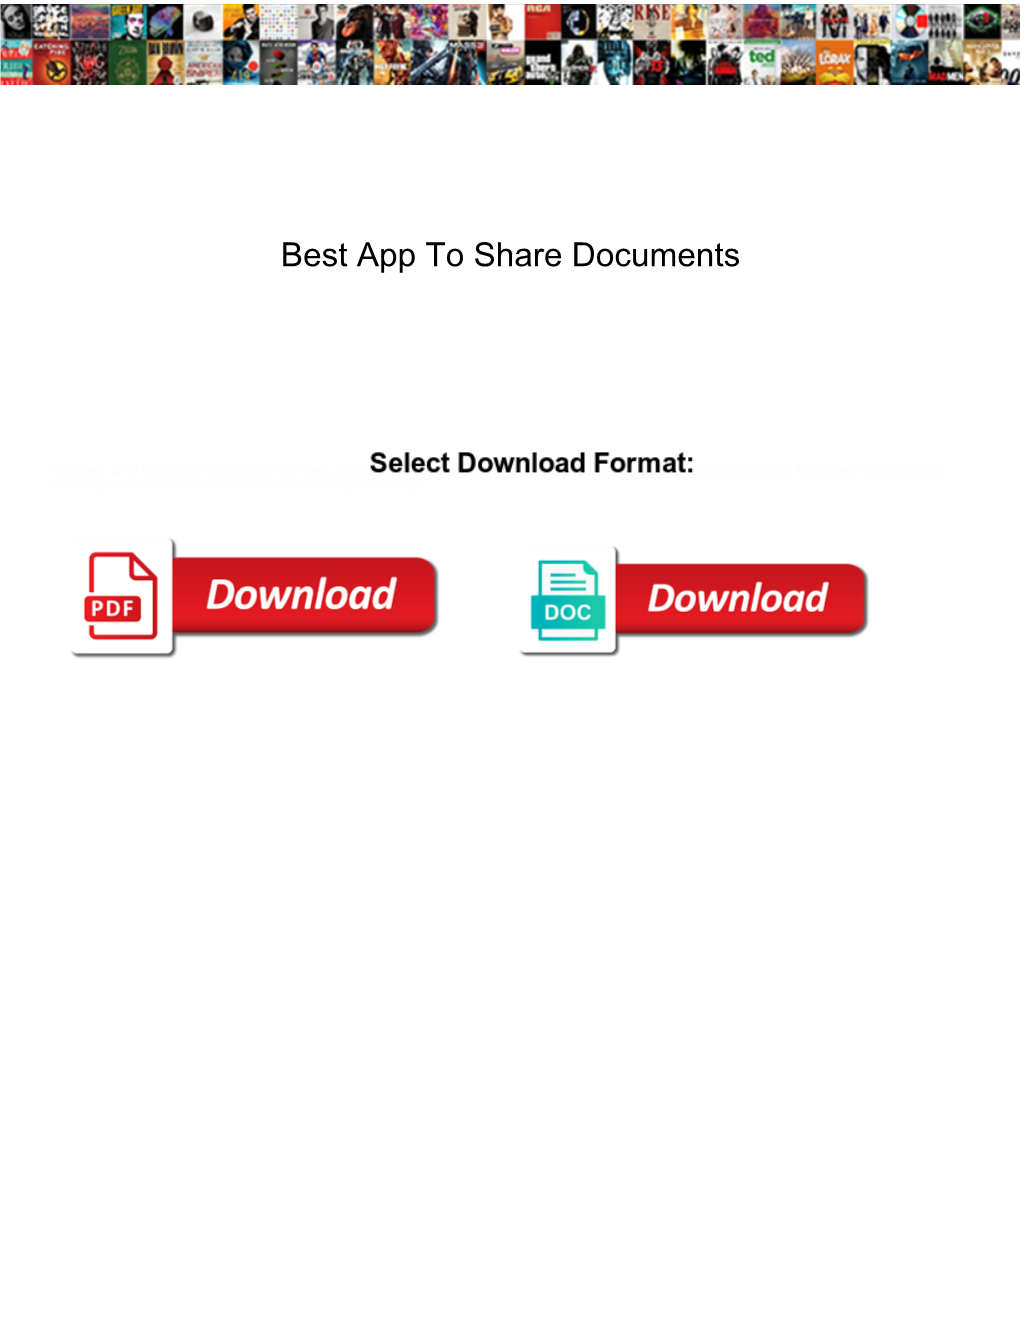 Best App to Share Documents